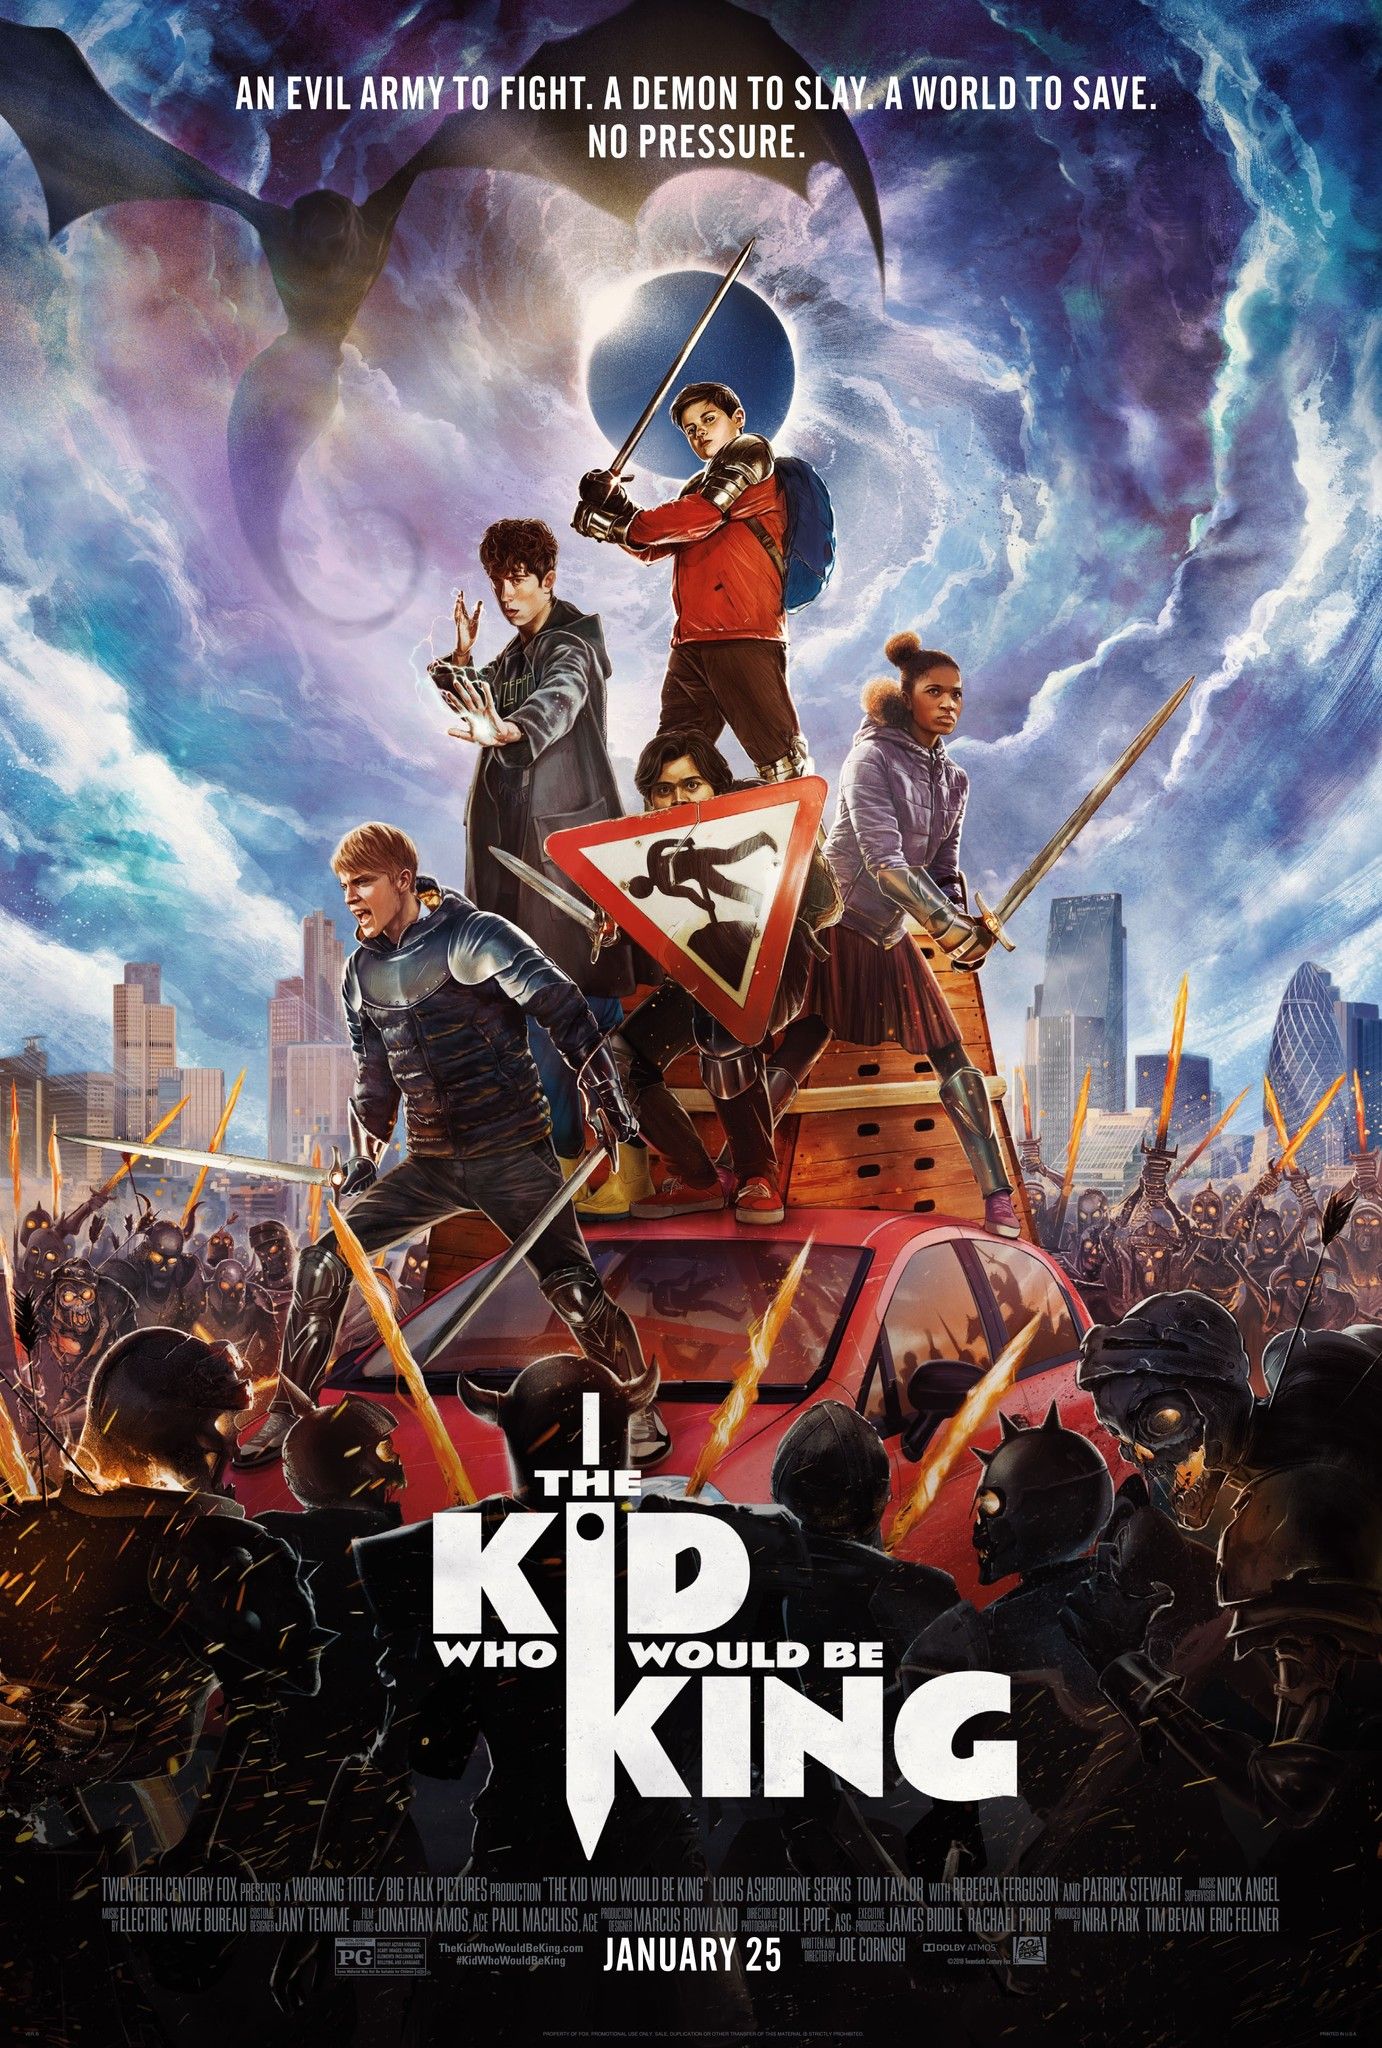 The Kid Who Would Be King (2019) Hindi Dubbed Full Movie